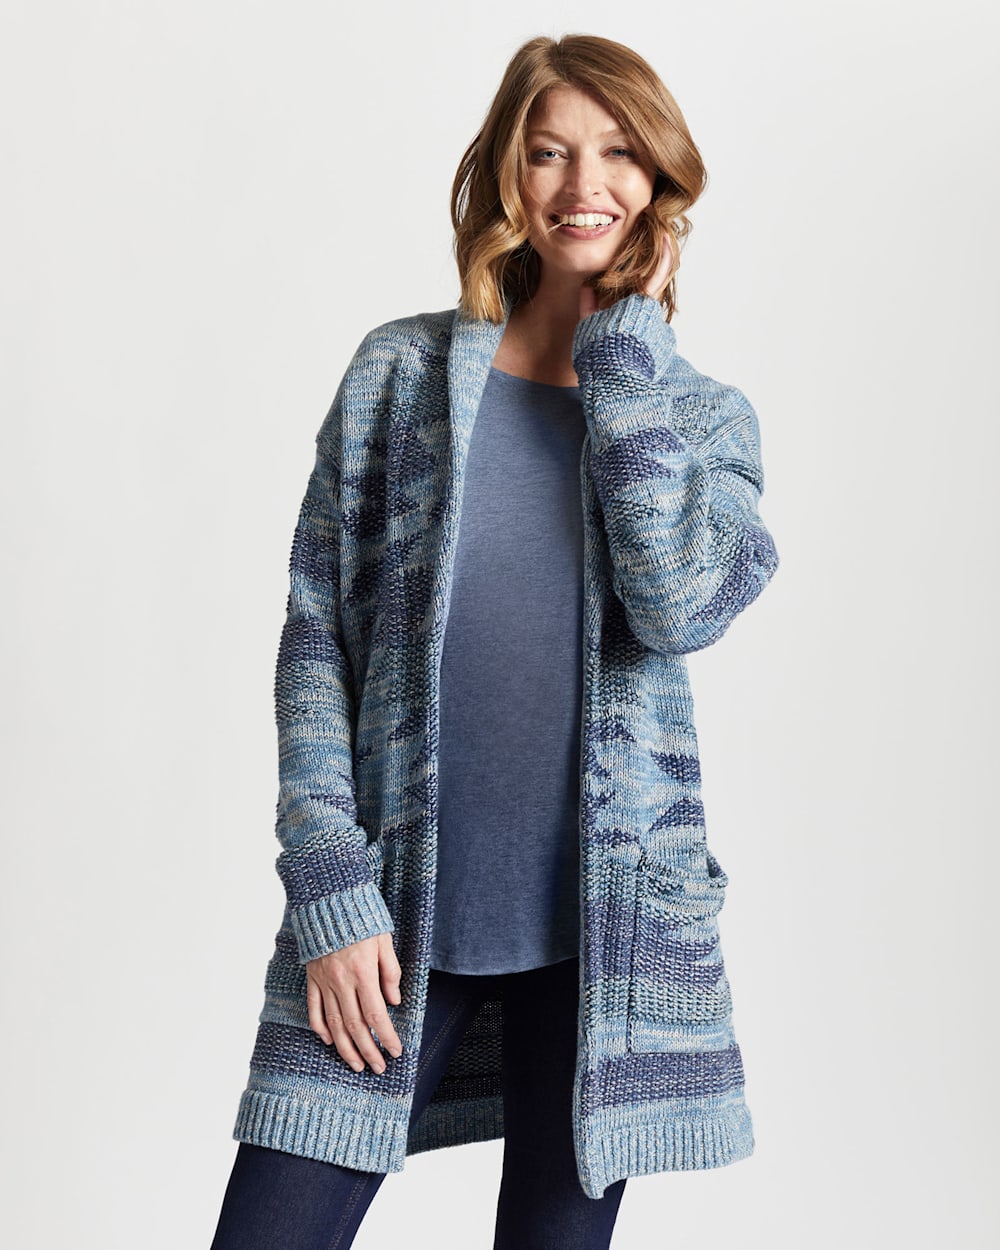 ALTERNATE VIEW OF WOMEN'S MONTEREY BELTED COTTON CARDIGAN IN BLUE MULTI image number 6